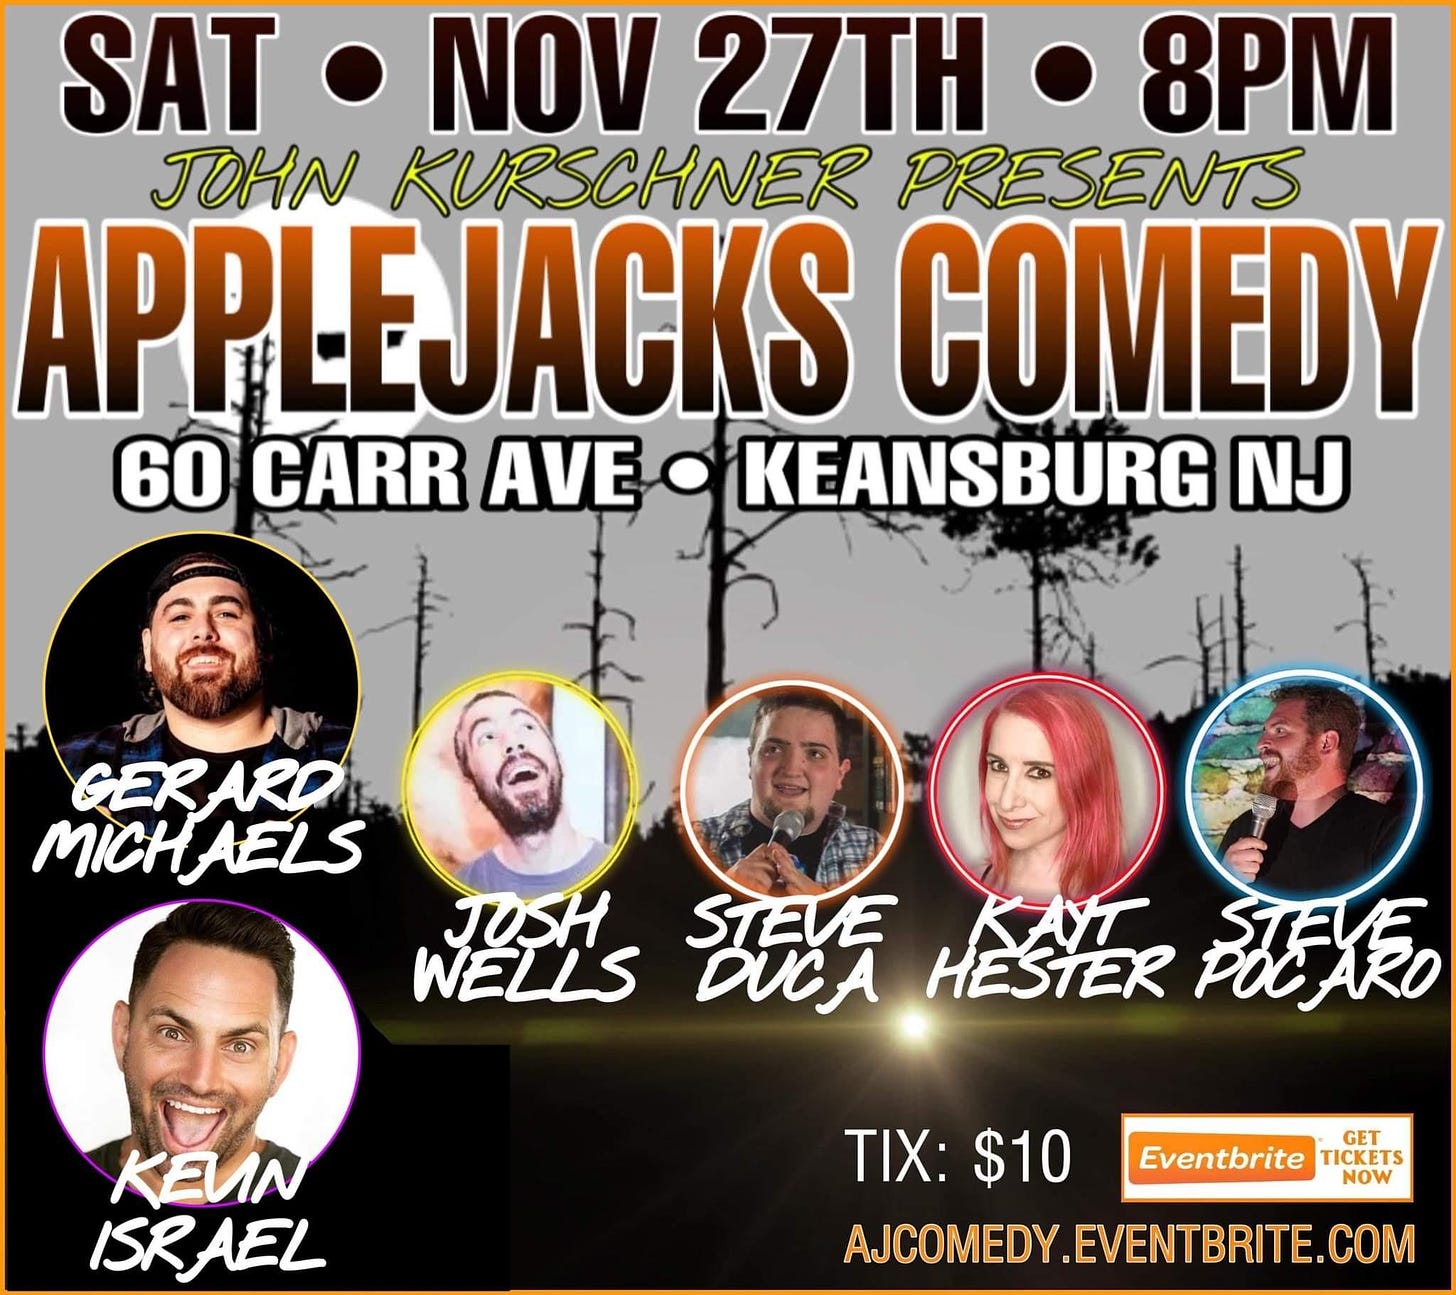 May be an image of 6 people and text that says 'SAT NOV 27TH 8PM JOHN KURSCHNER PRESENTS APPLEJACKS COMEDY 60 CARR AVE KEANSBURG NJ GERARD MICHAELS MICH JUSH STEVE WELLS DUCA HESTER BX KEUN ISRAEL TIX: $10 Eventbrite TICKETS NOW AJCOMEDY.EVENTBRITE.COM'